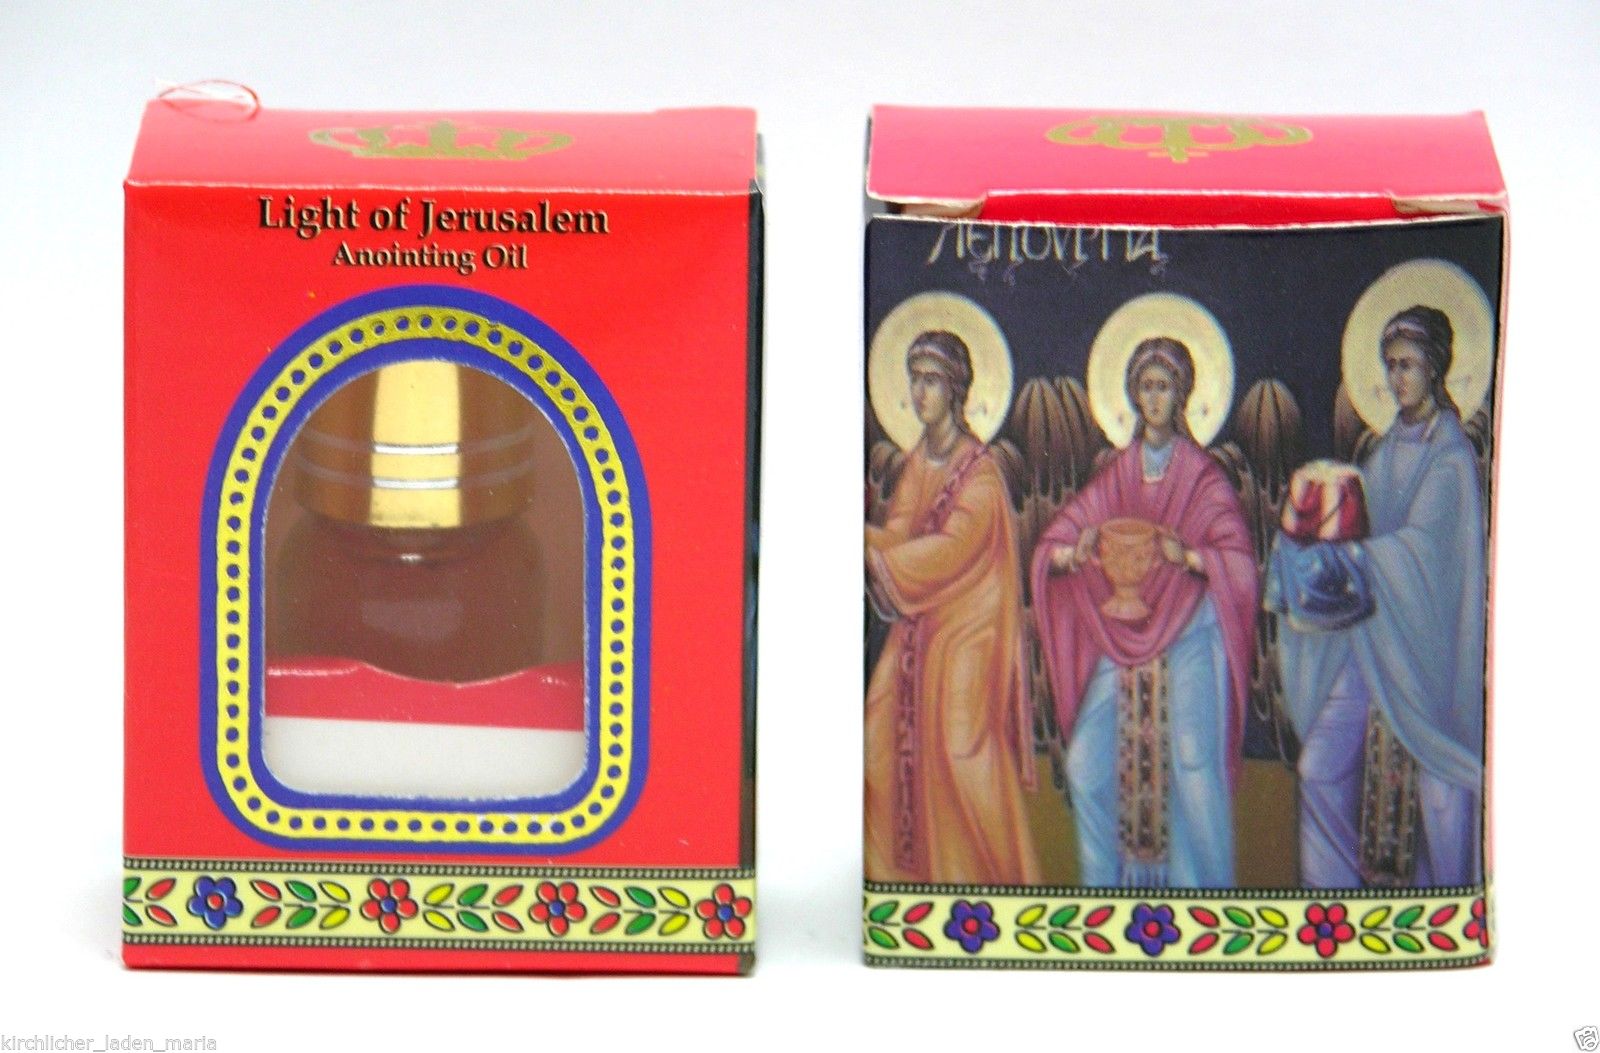 Oil consecrated at the Holy Sepulchre in Jerusalem 5 ml